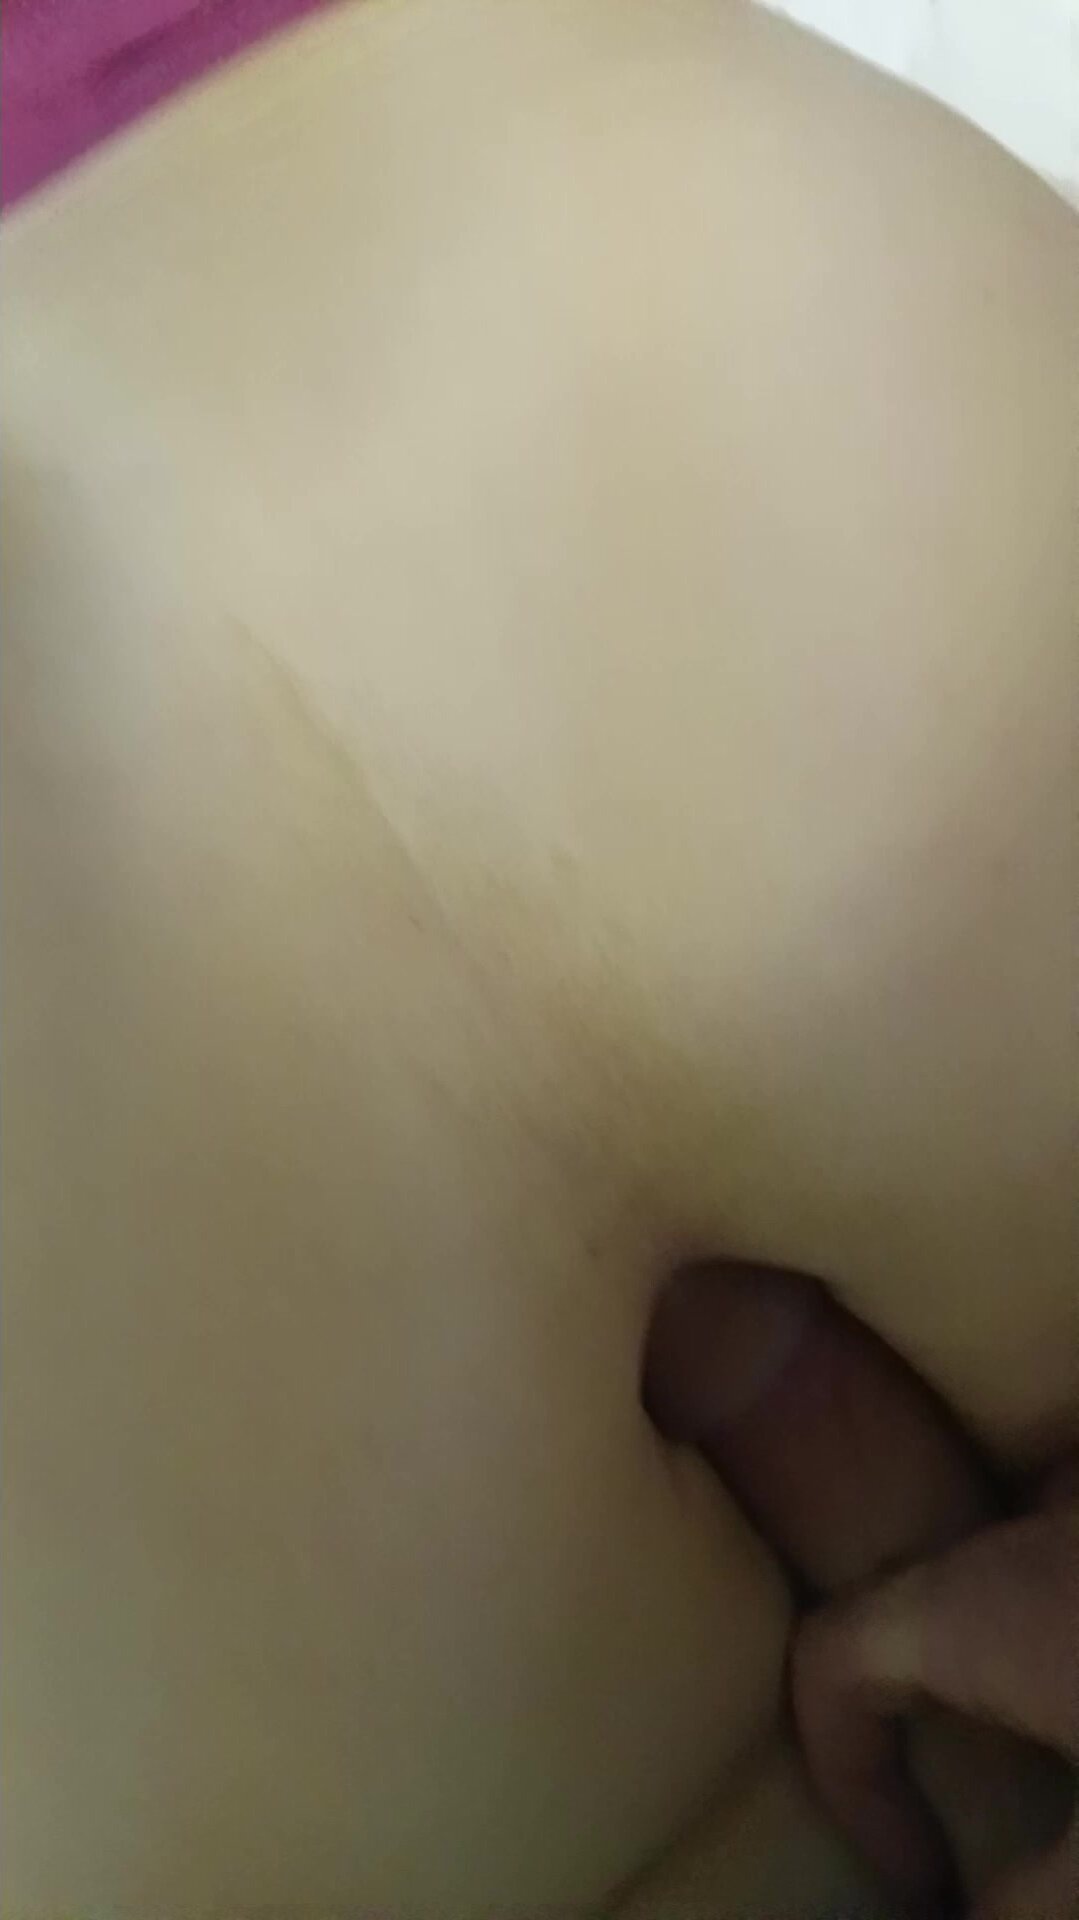 Hairy , scent, anal warmup